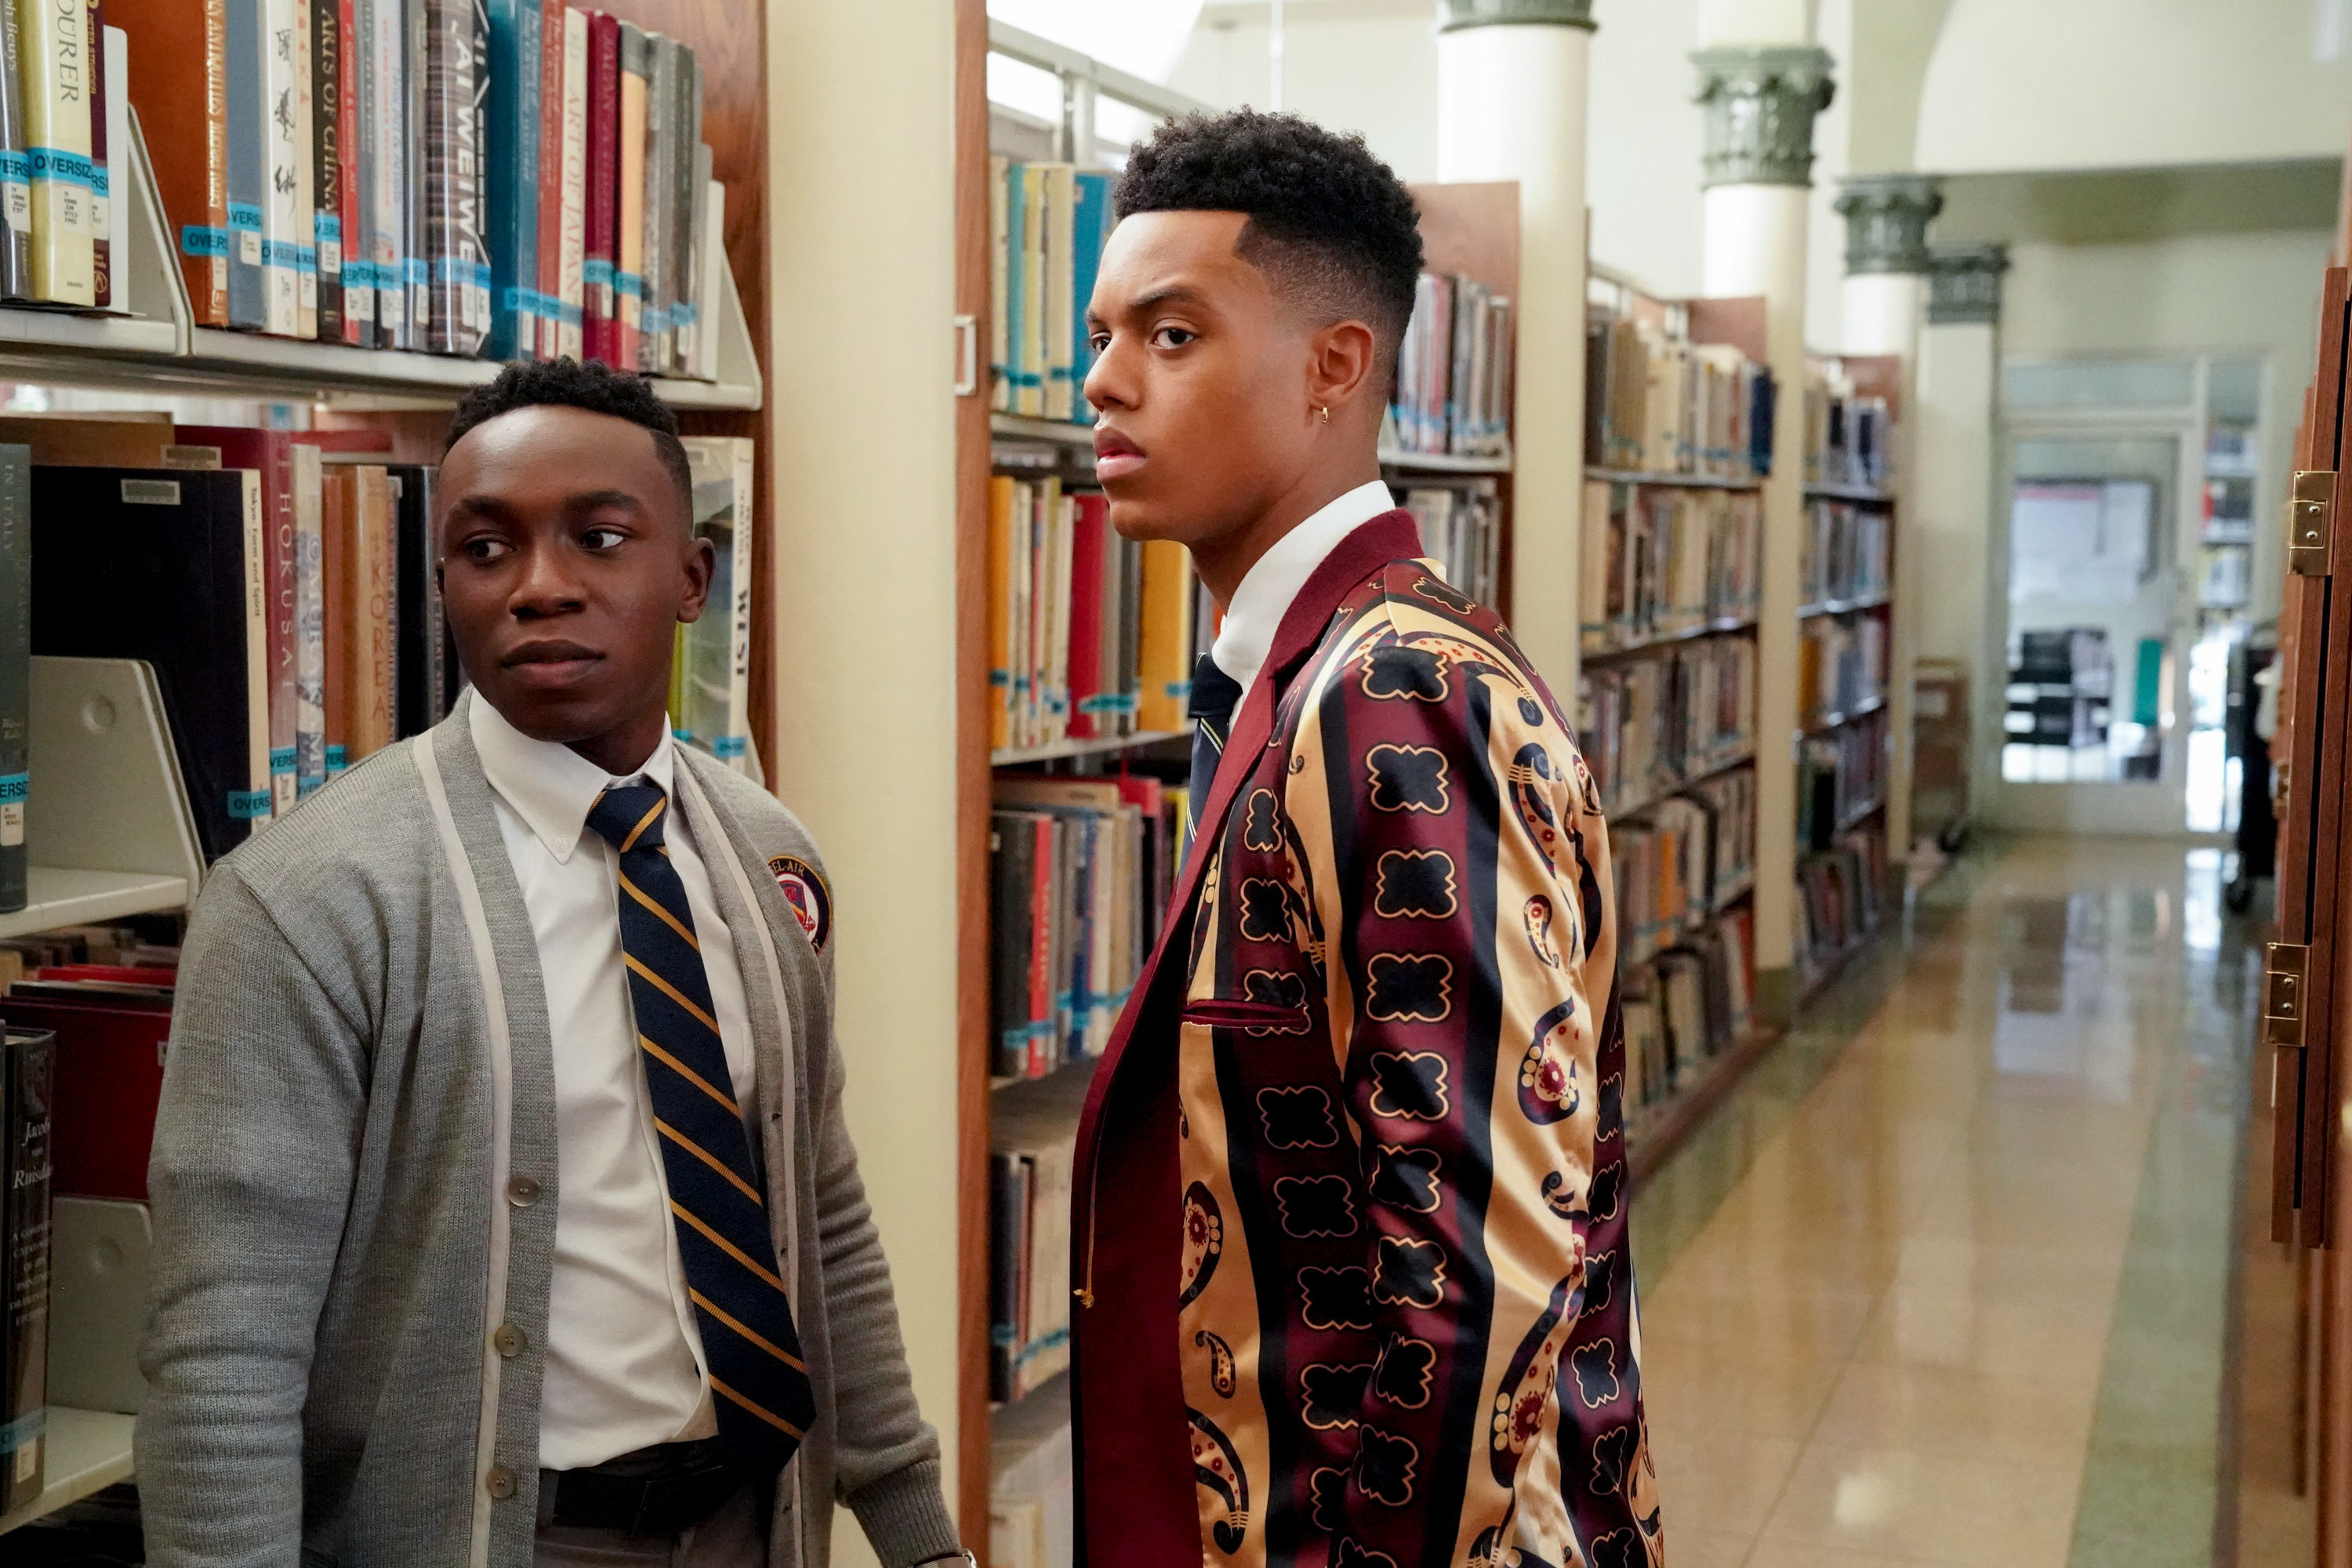 Olly Sholotan as Carlton Banks and Jabari Banks as Will Smith standing in a school library